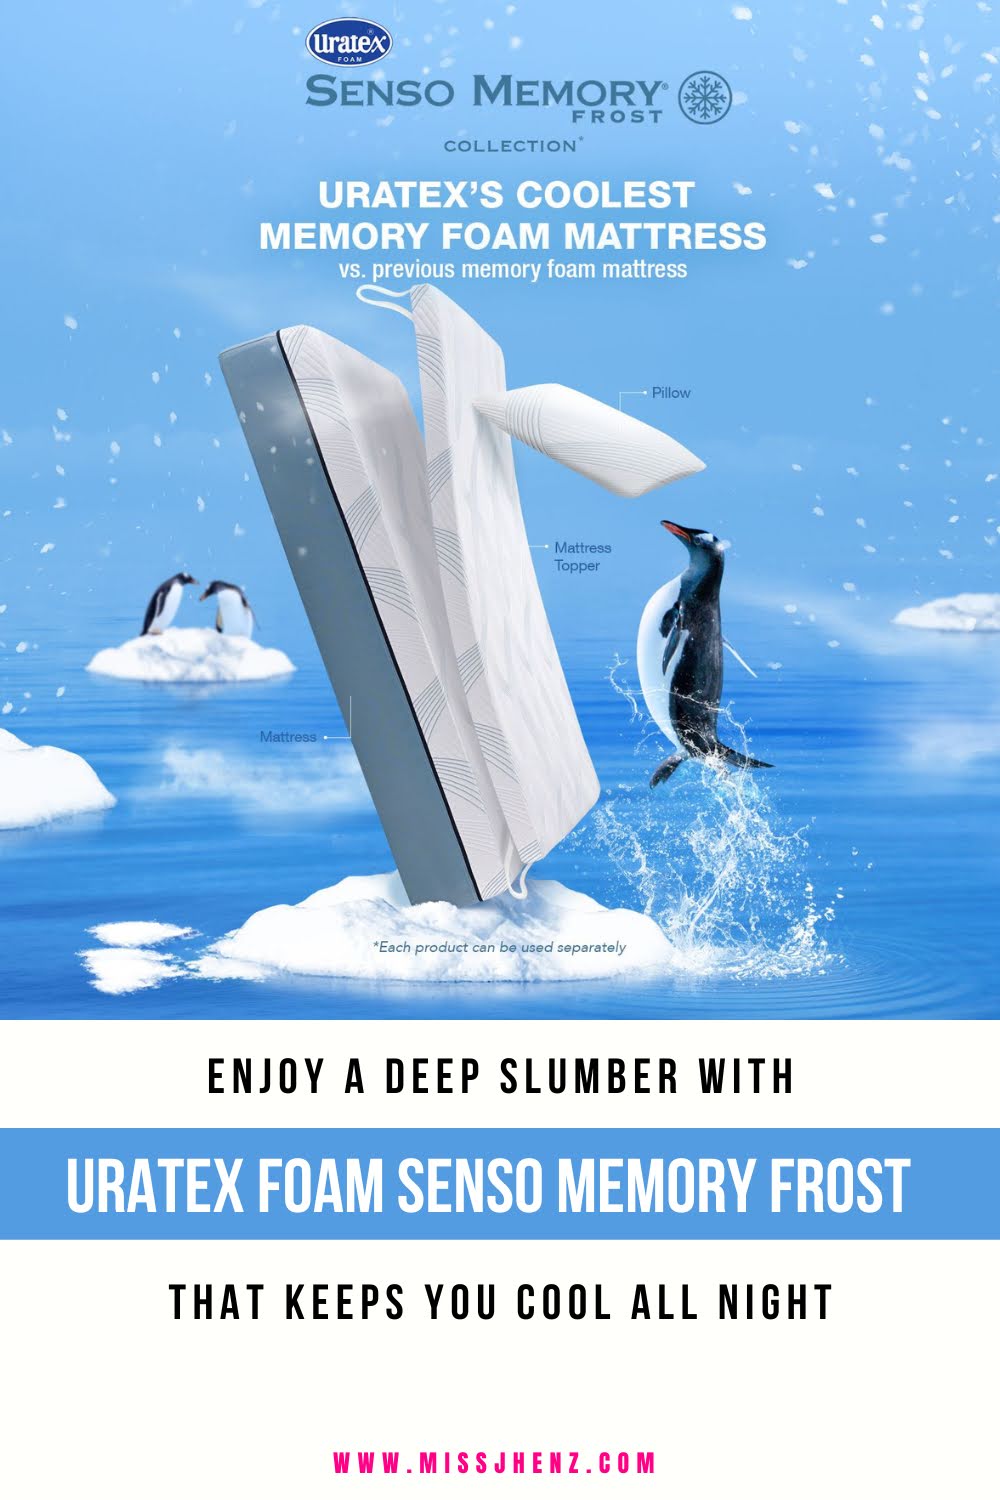 Enjoy a deep slumber with Uratex Foam Senso Memory Frost that keeps you cool all night